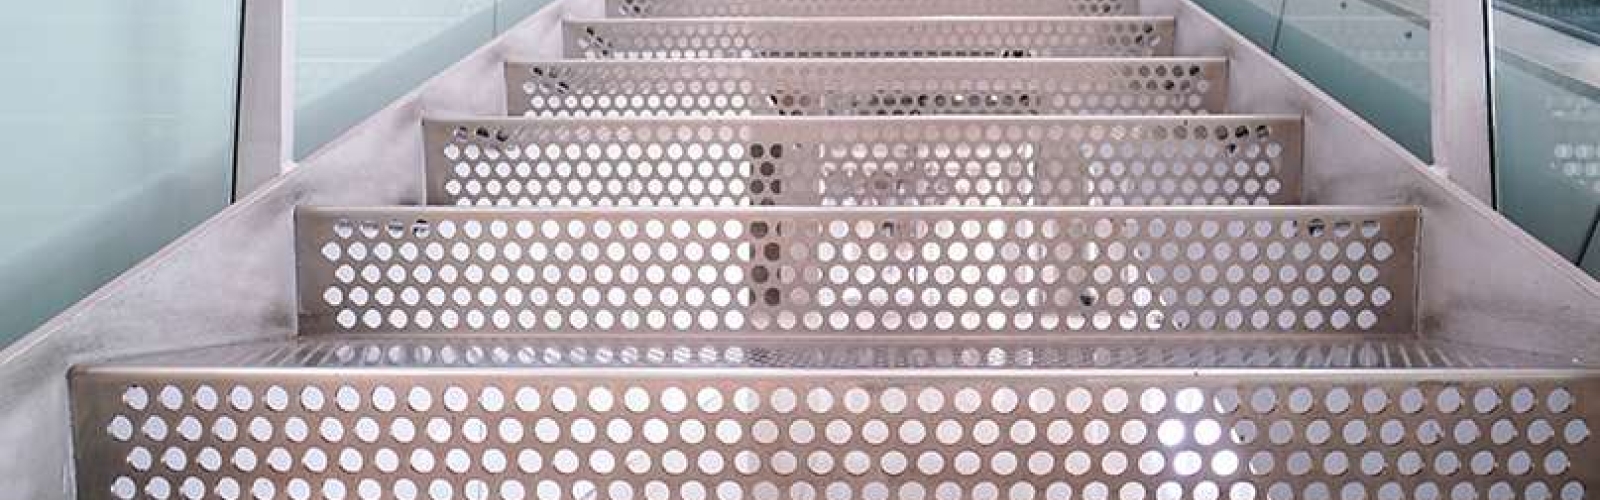 a close up of perforated metal stair treads and risers